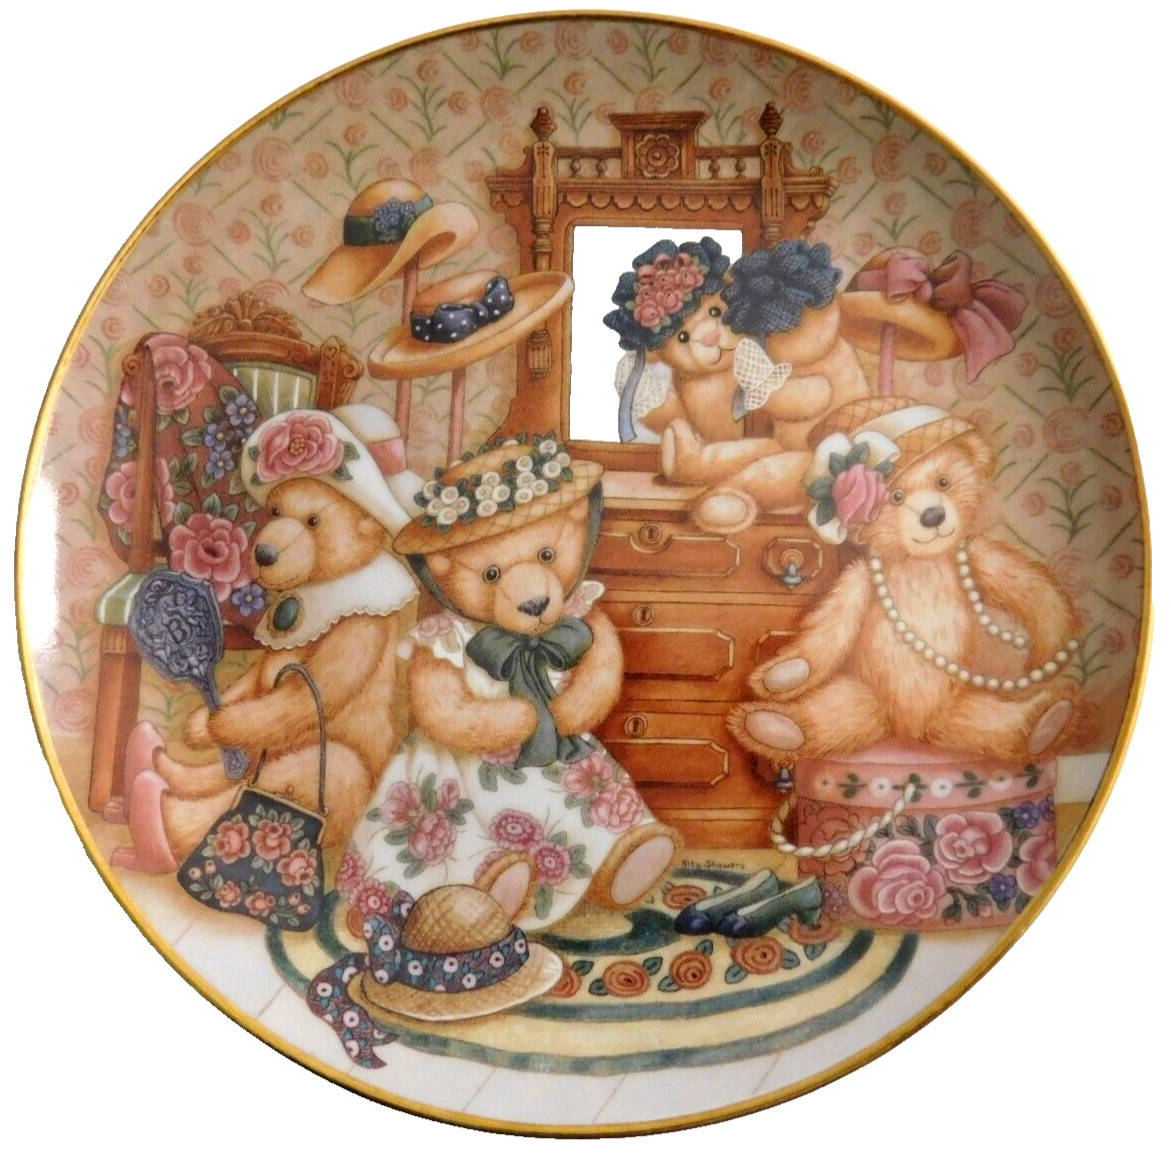 Franklin Mint Heirloom Collectors Bear Plate Hats Off to Teddy By Nita Showers